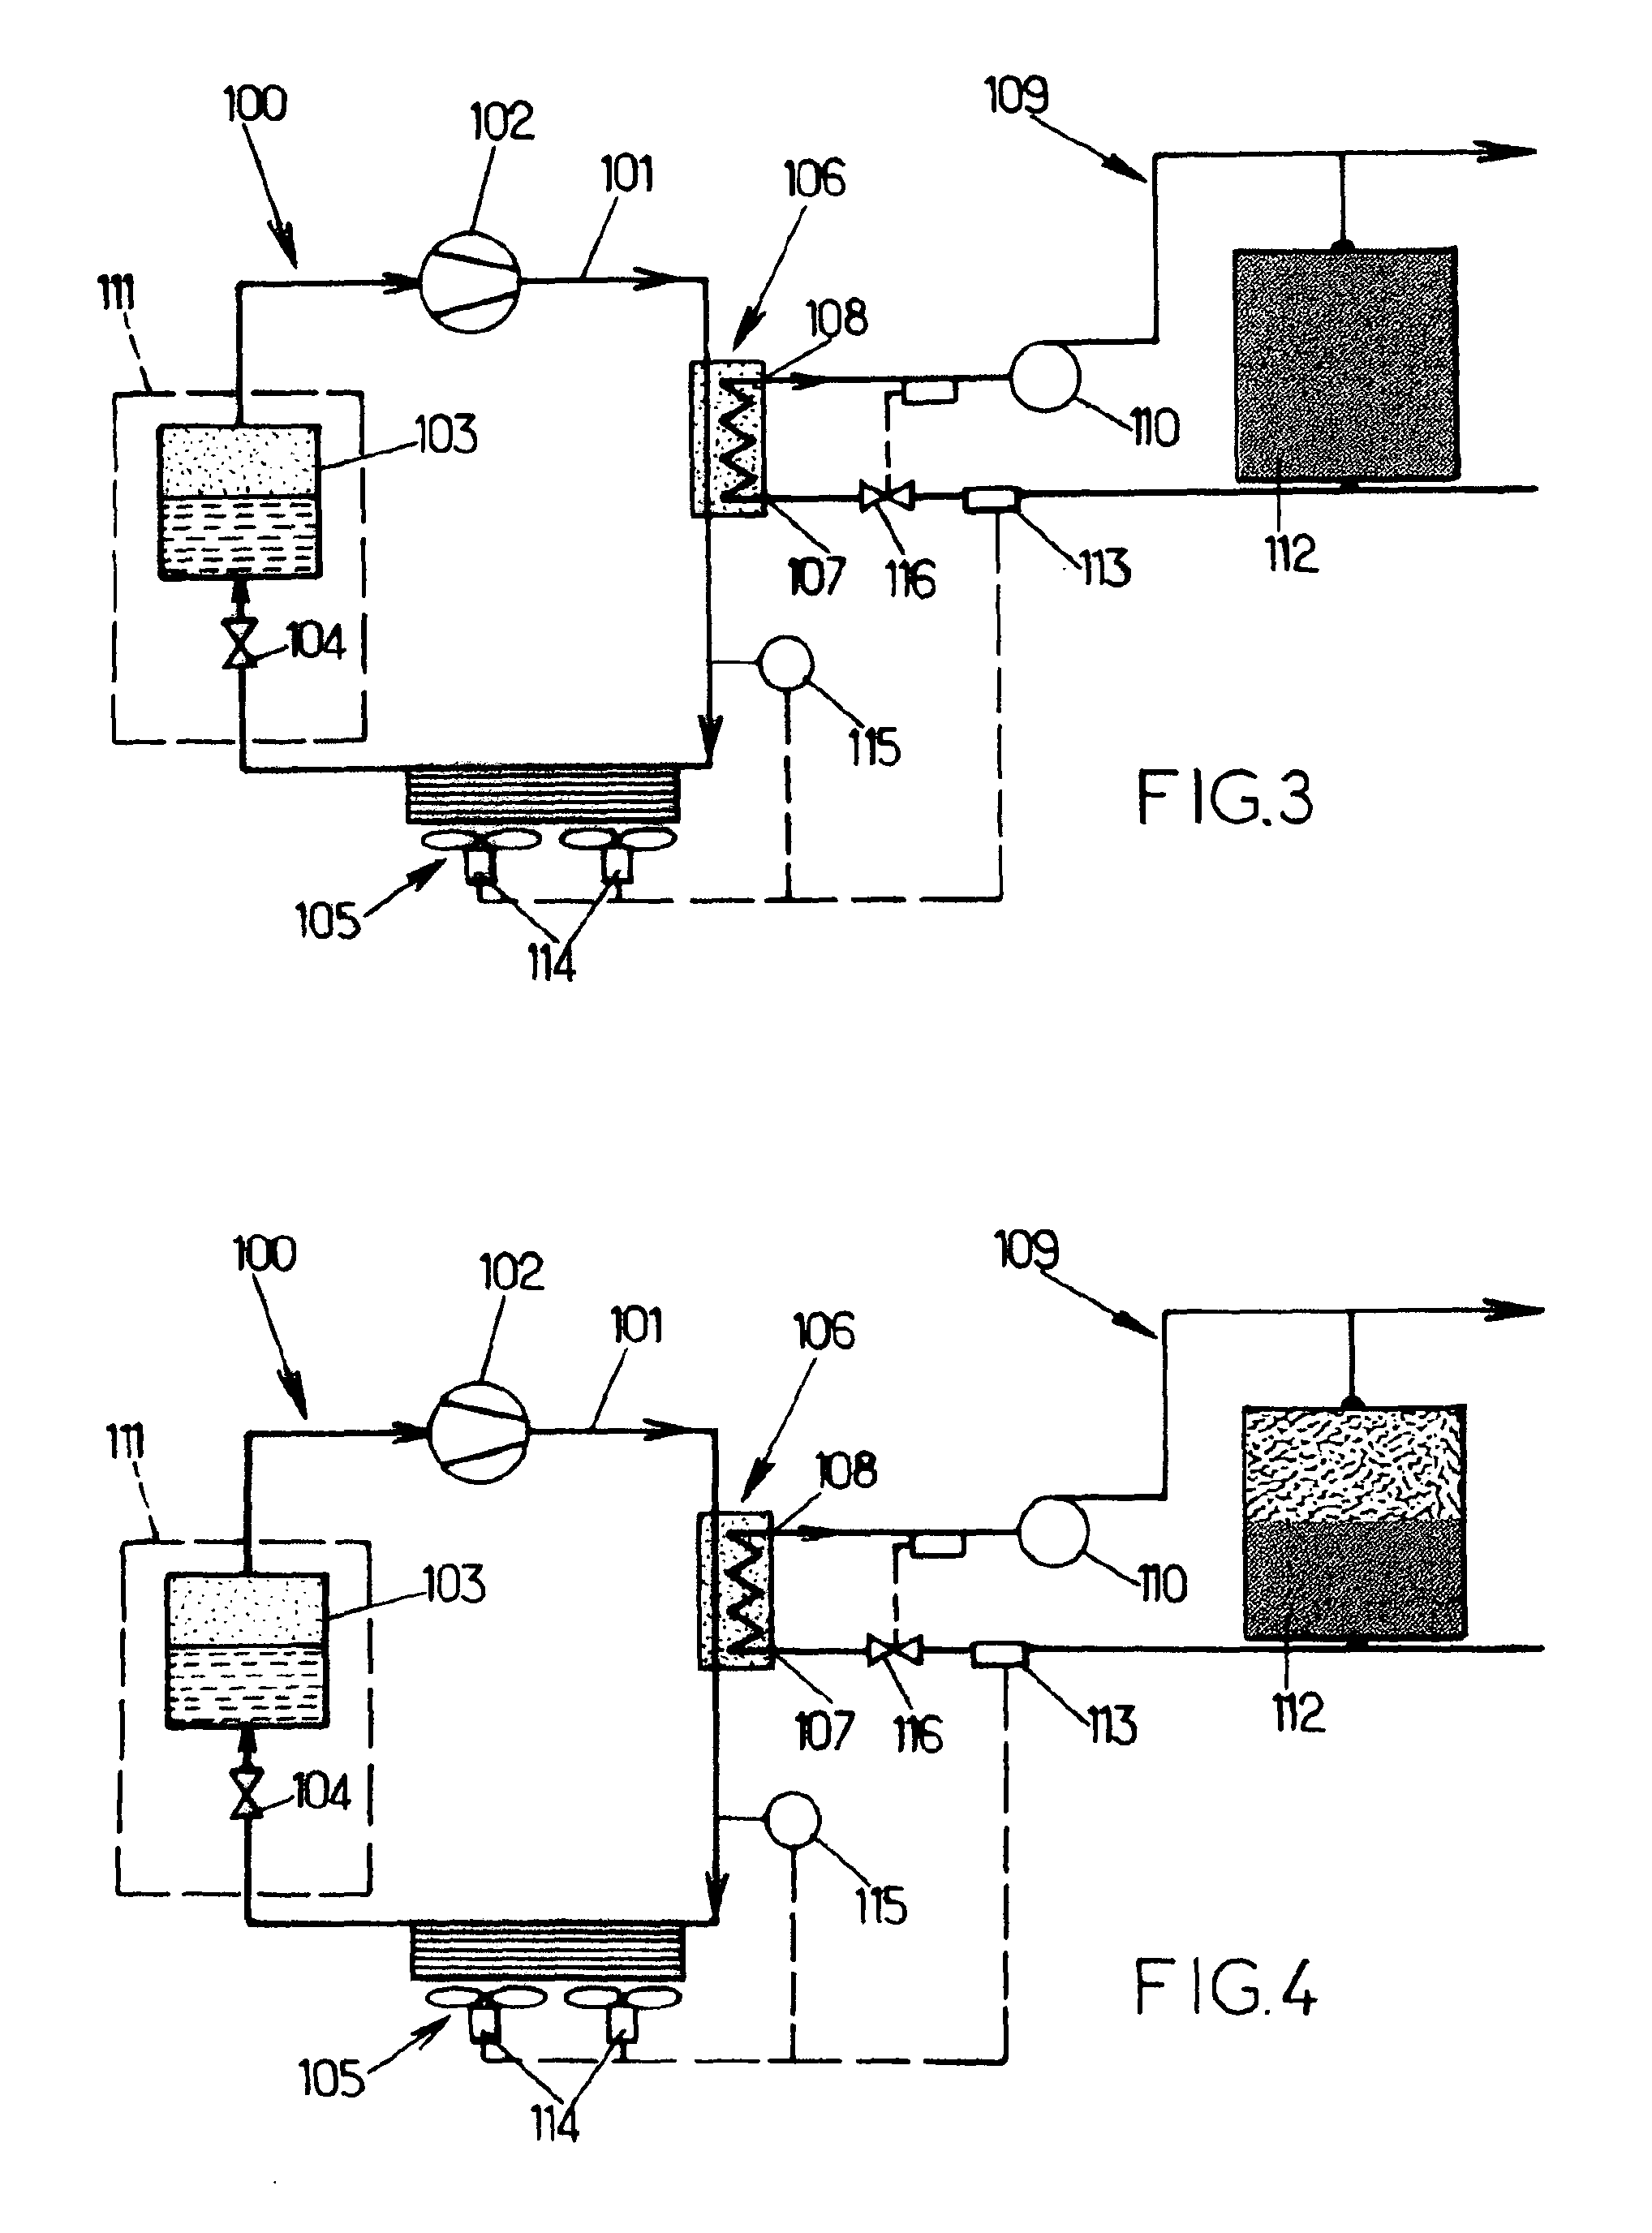 Method and device for heat recovery on a vapour refrigeration system